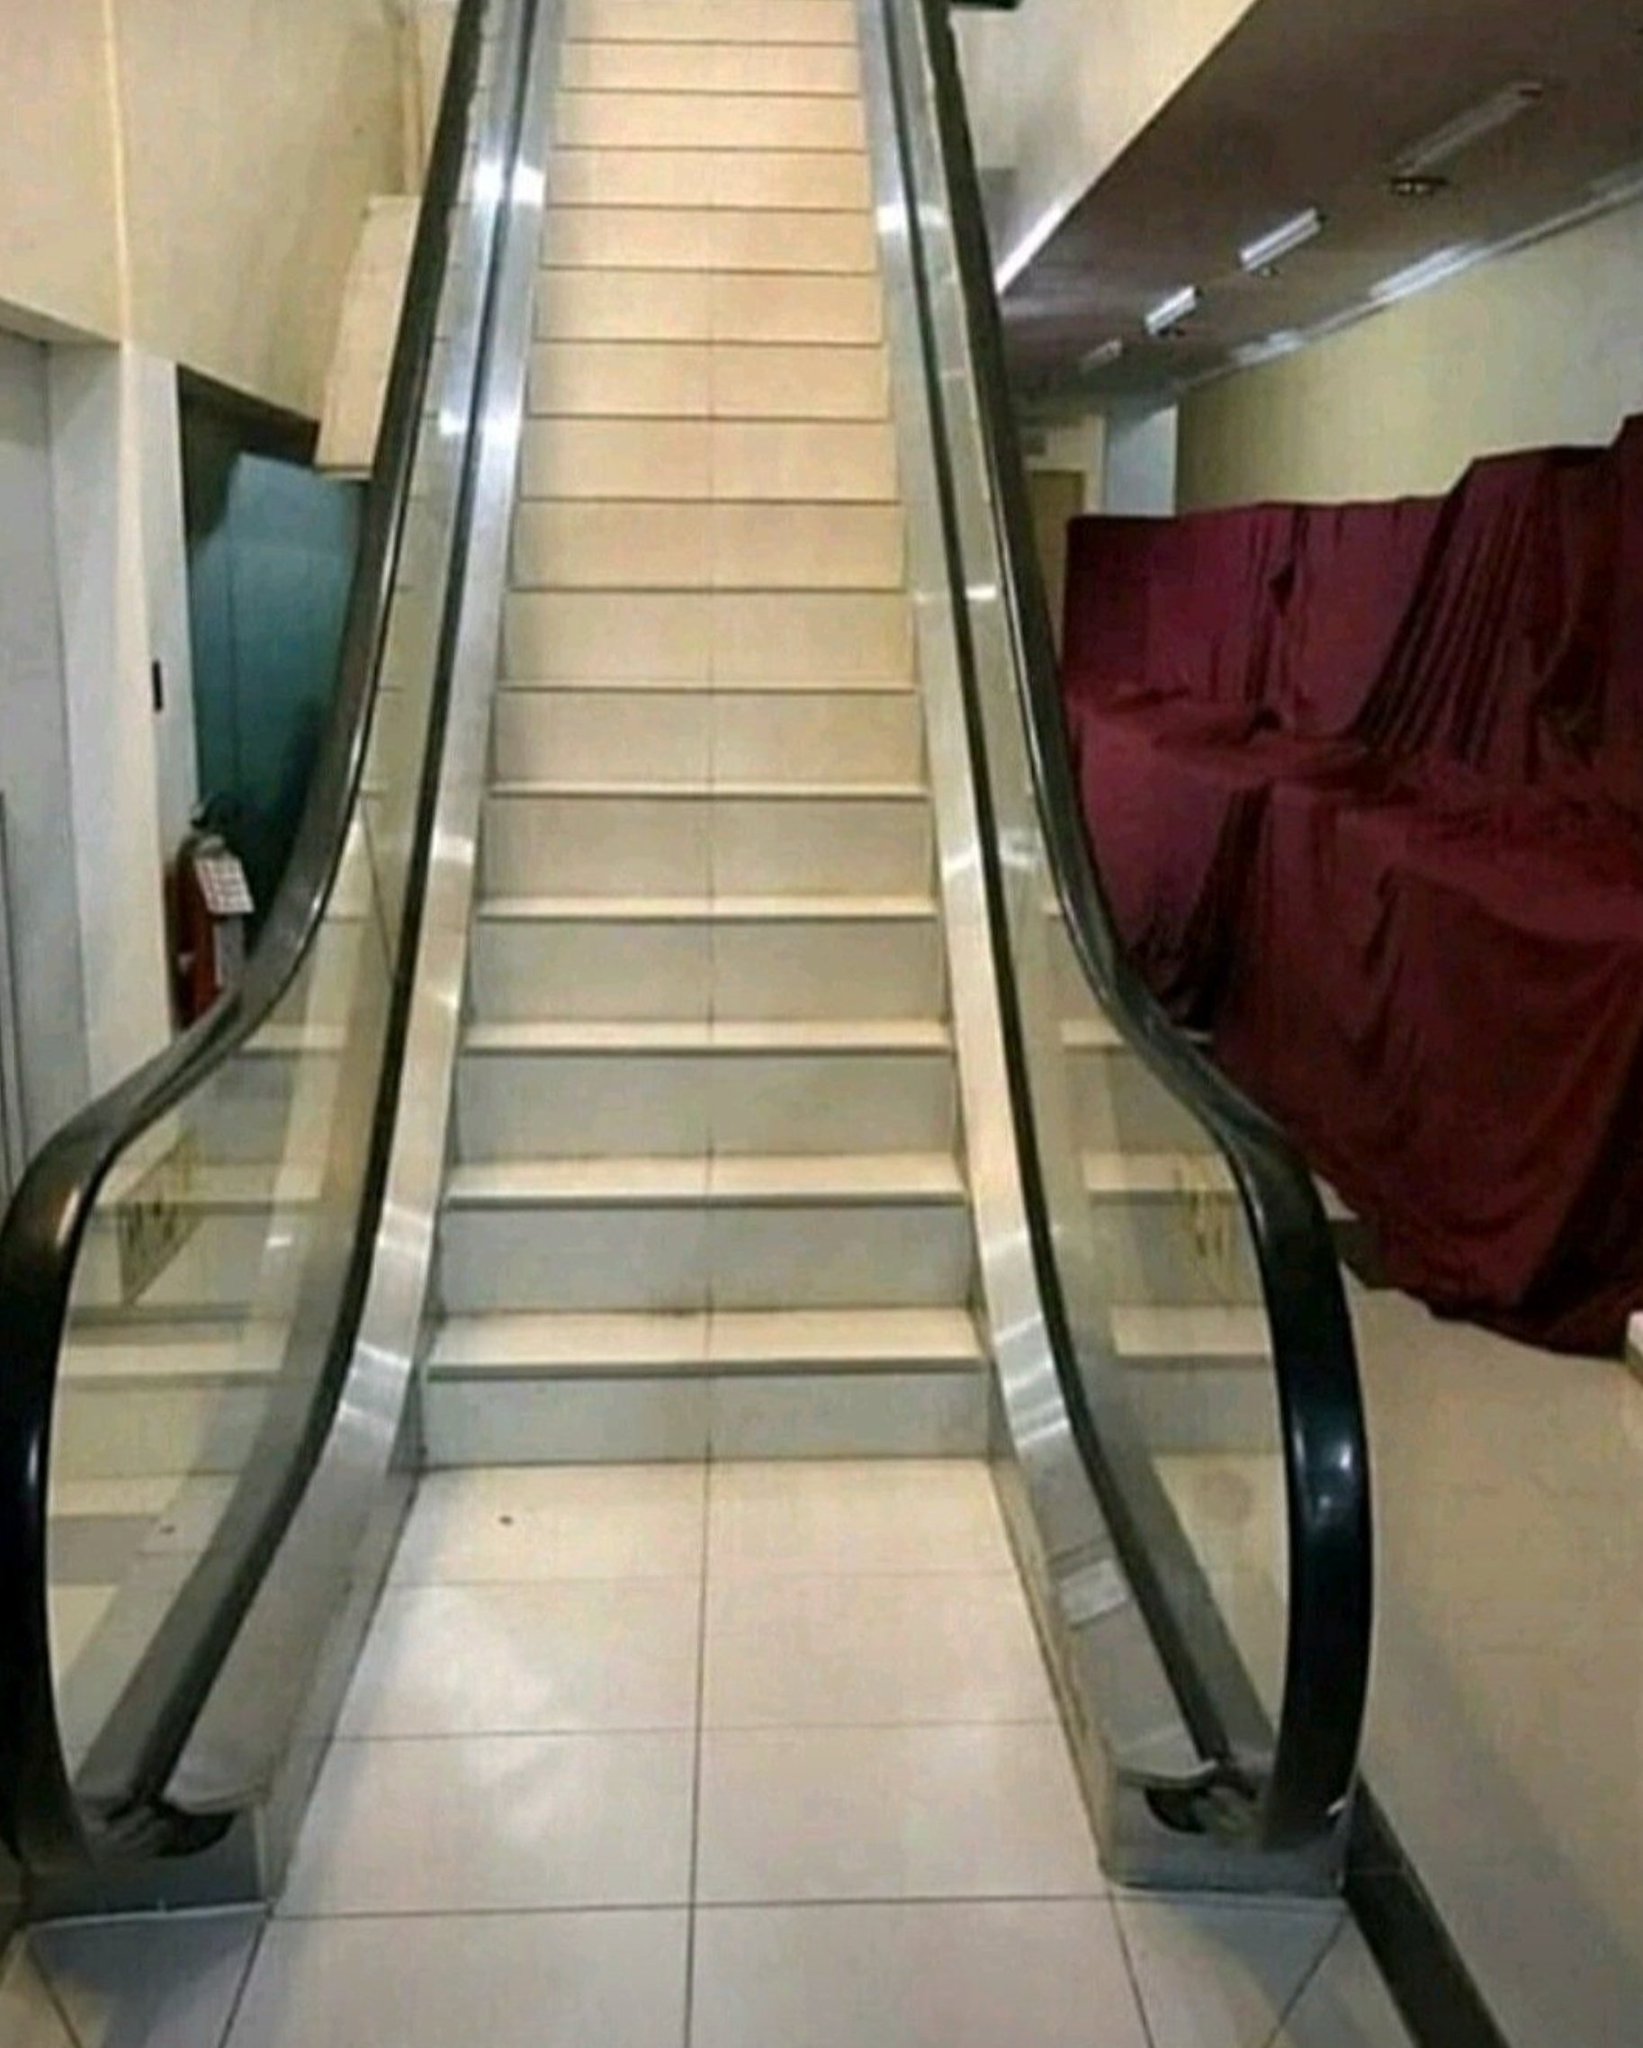 An "escalator" made of stationary marble stairs"